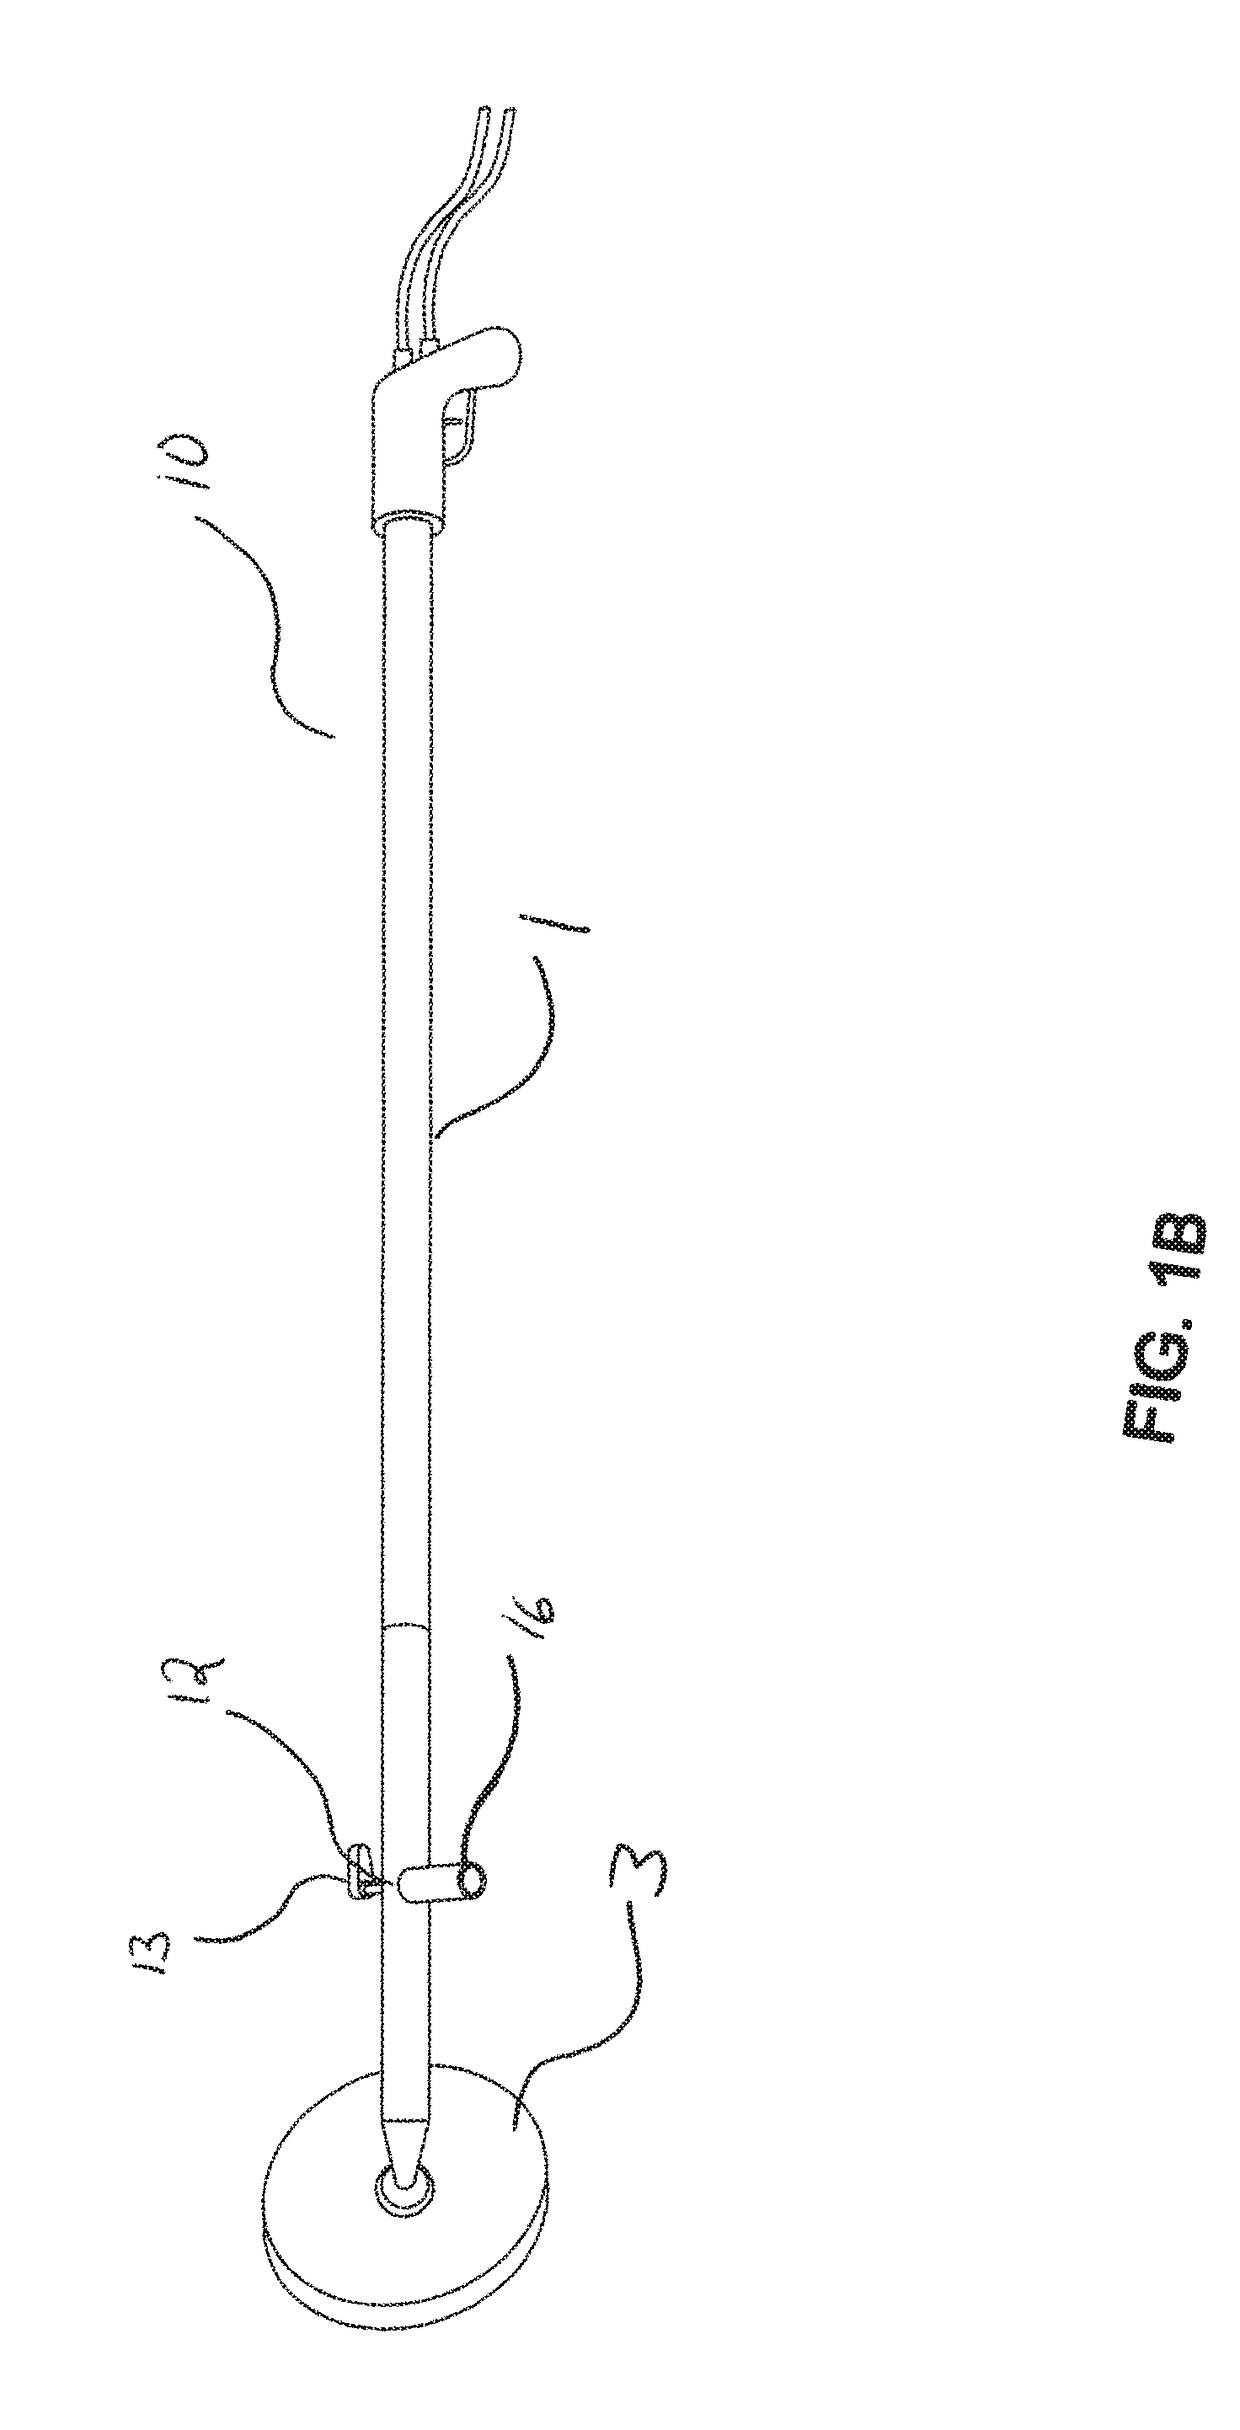 Light touch sealant applicator device